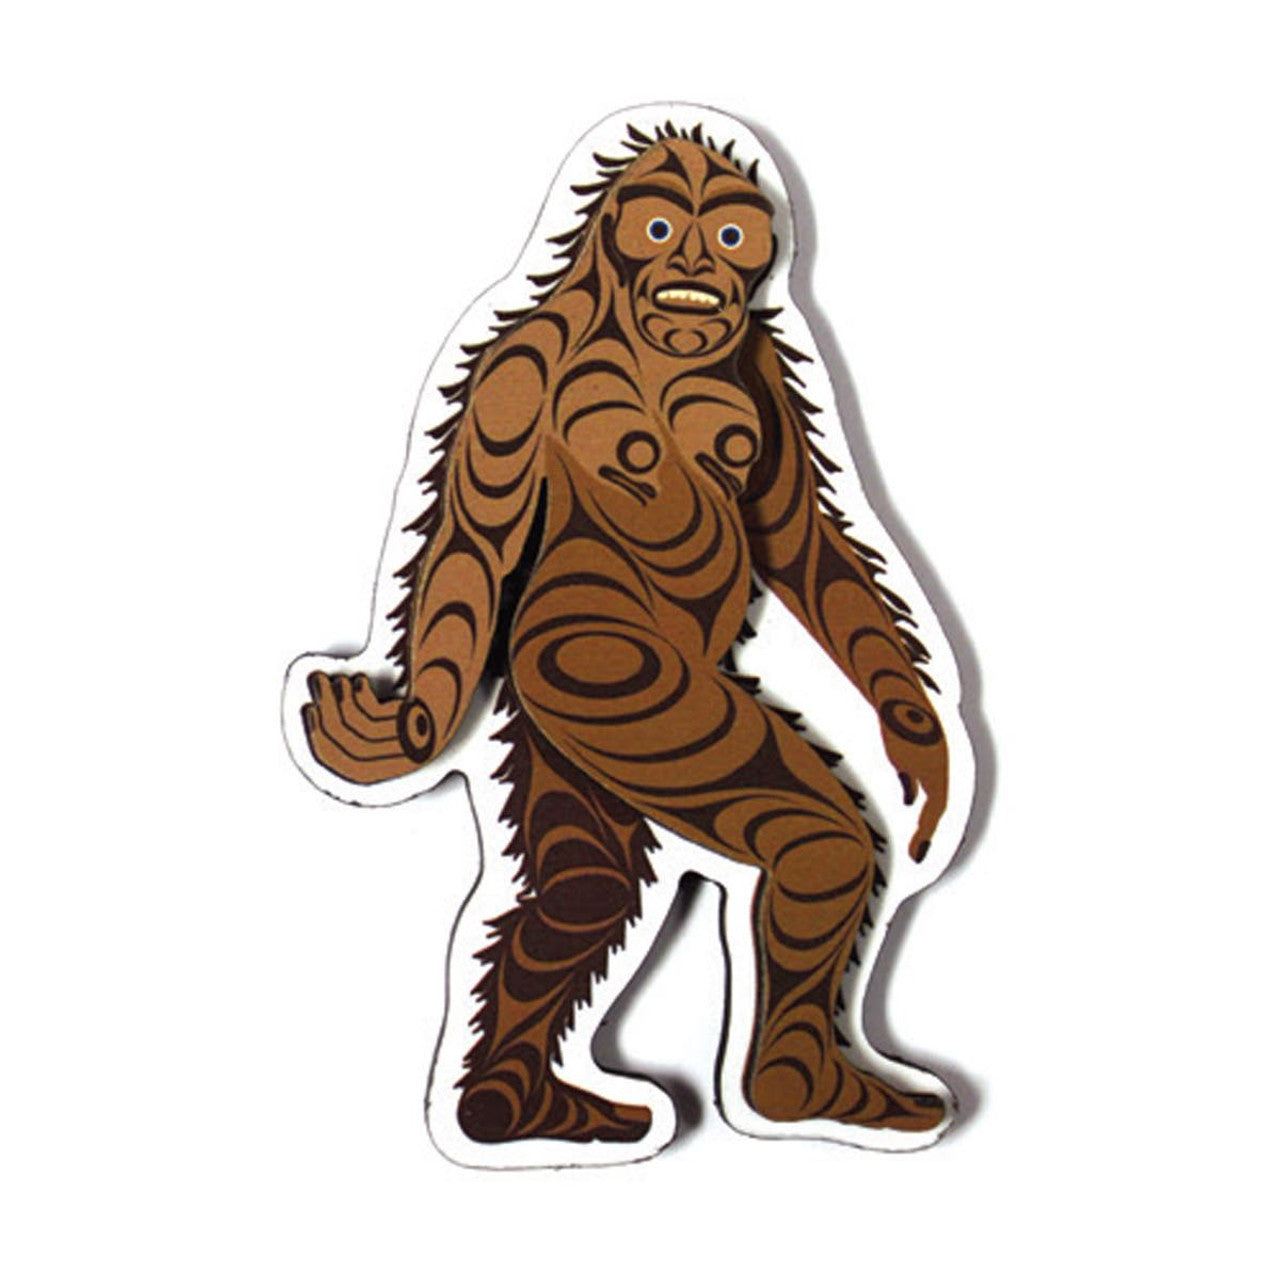 3D MAGNETS - Francis Horne Sr. Sasquatch - M365 - House of Himwitsa Native Art Gallery and Gifts